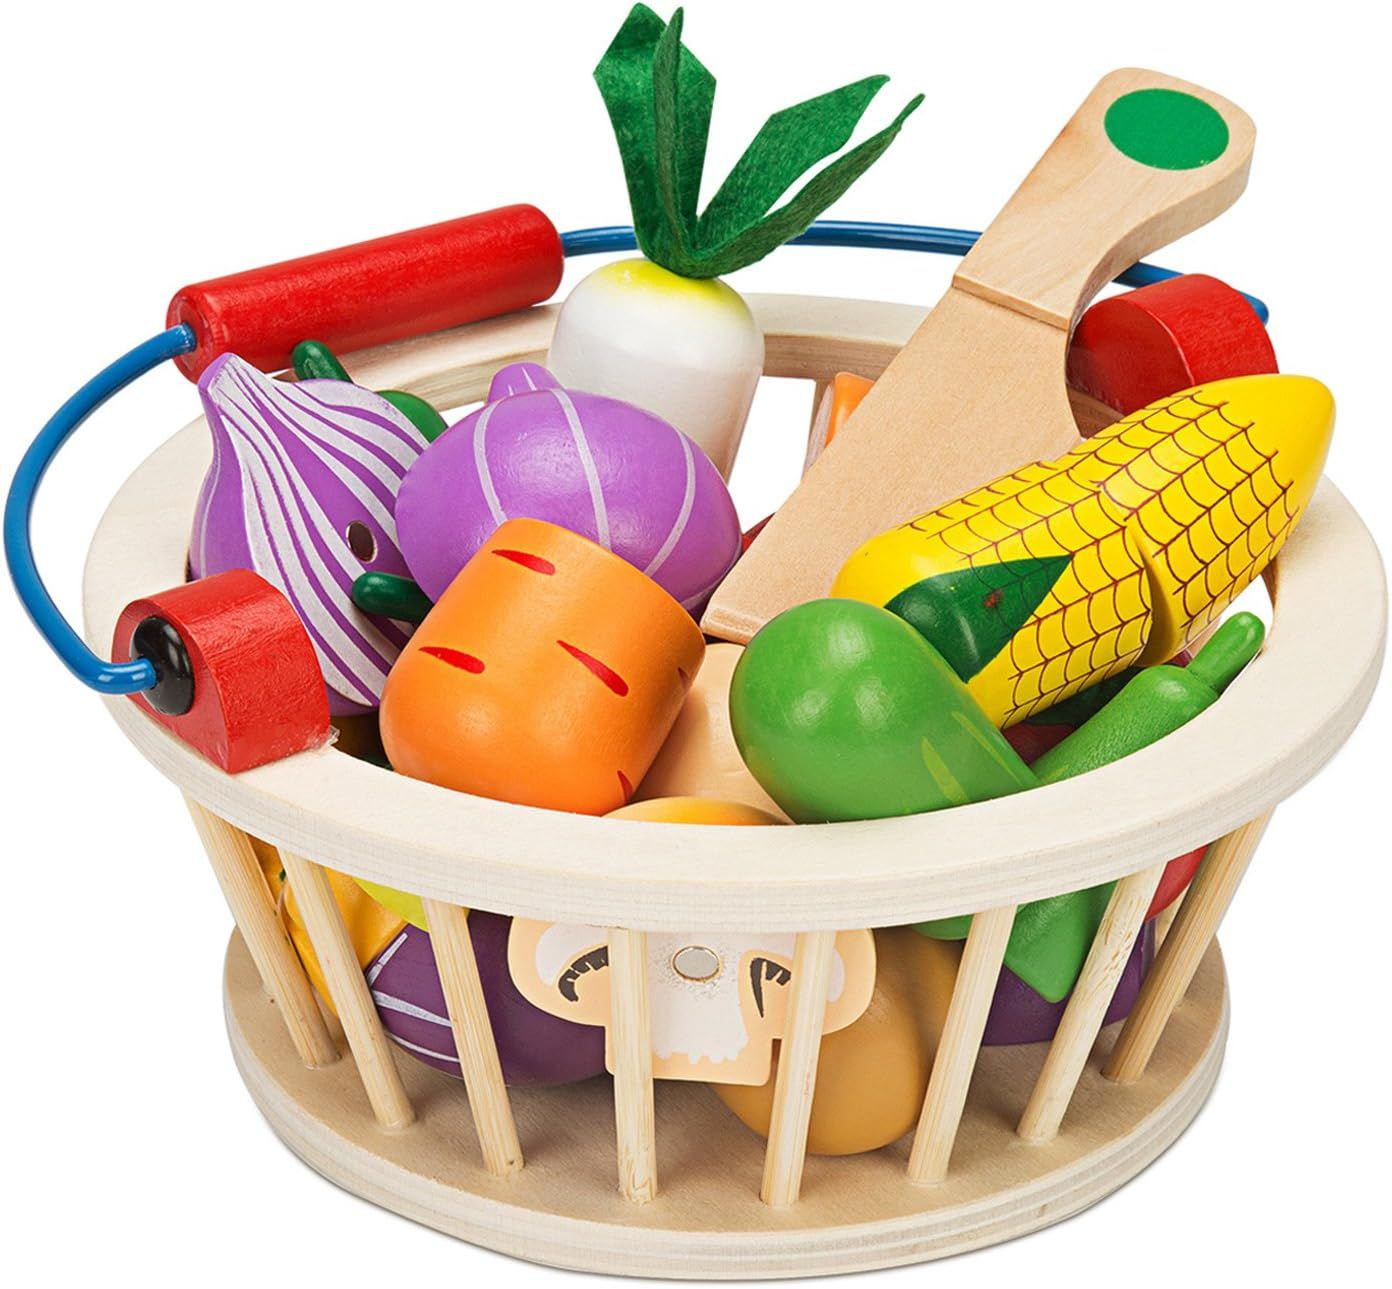 Victostar Magnetic Wooden Cutting Fruits Vegetables Food Play Toy Set with Basket for Kids (Vegetabl | Amazon (US)